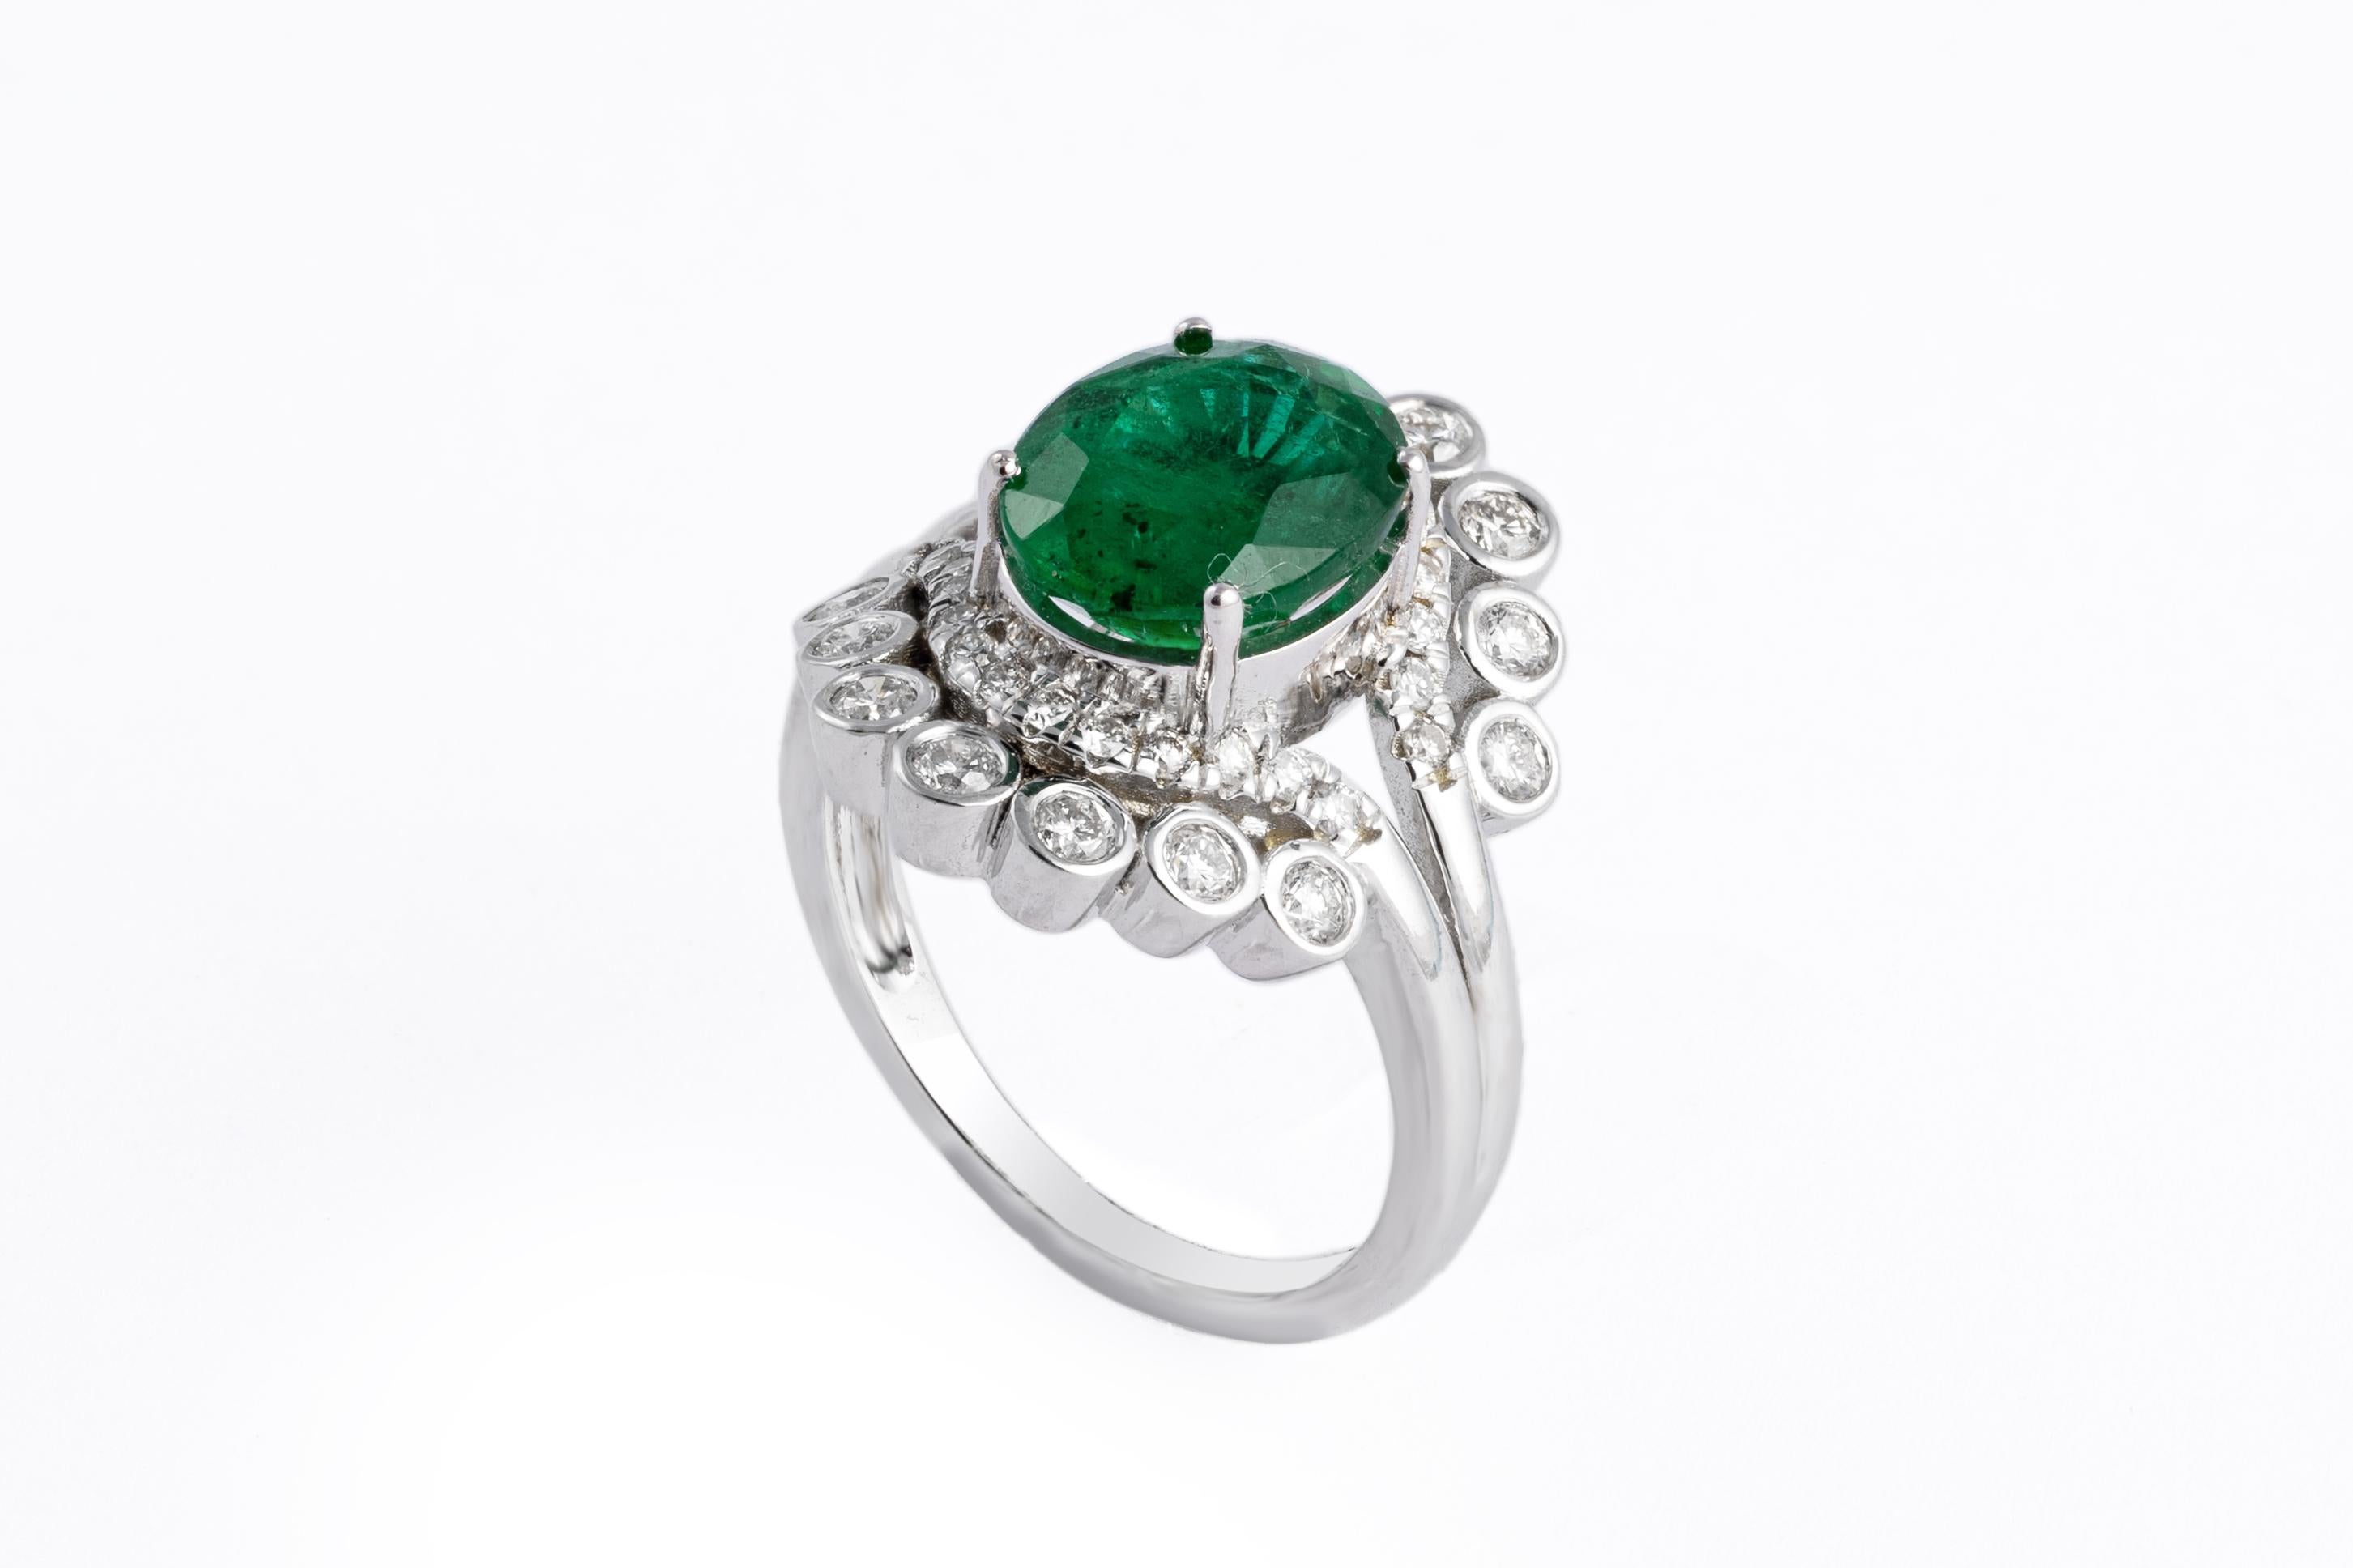 Emerald Cut 2.96cts Zambian Emerald Ring with 0.65cts Diamonds and 14k Gold For Sale